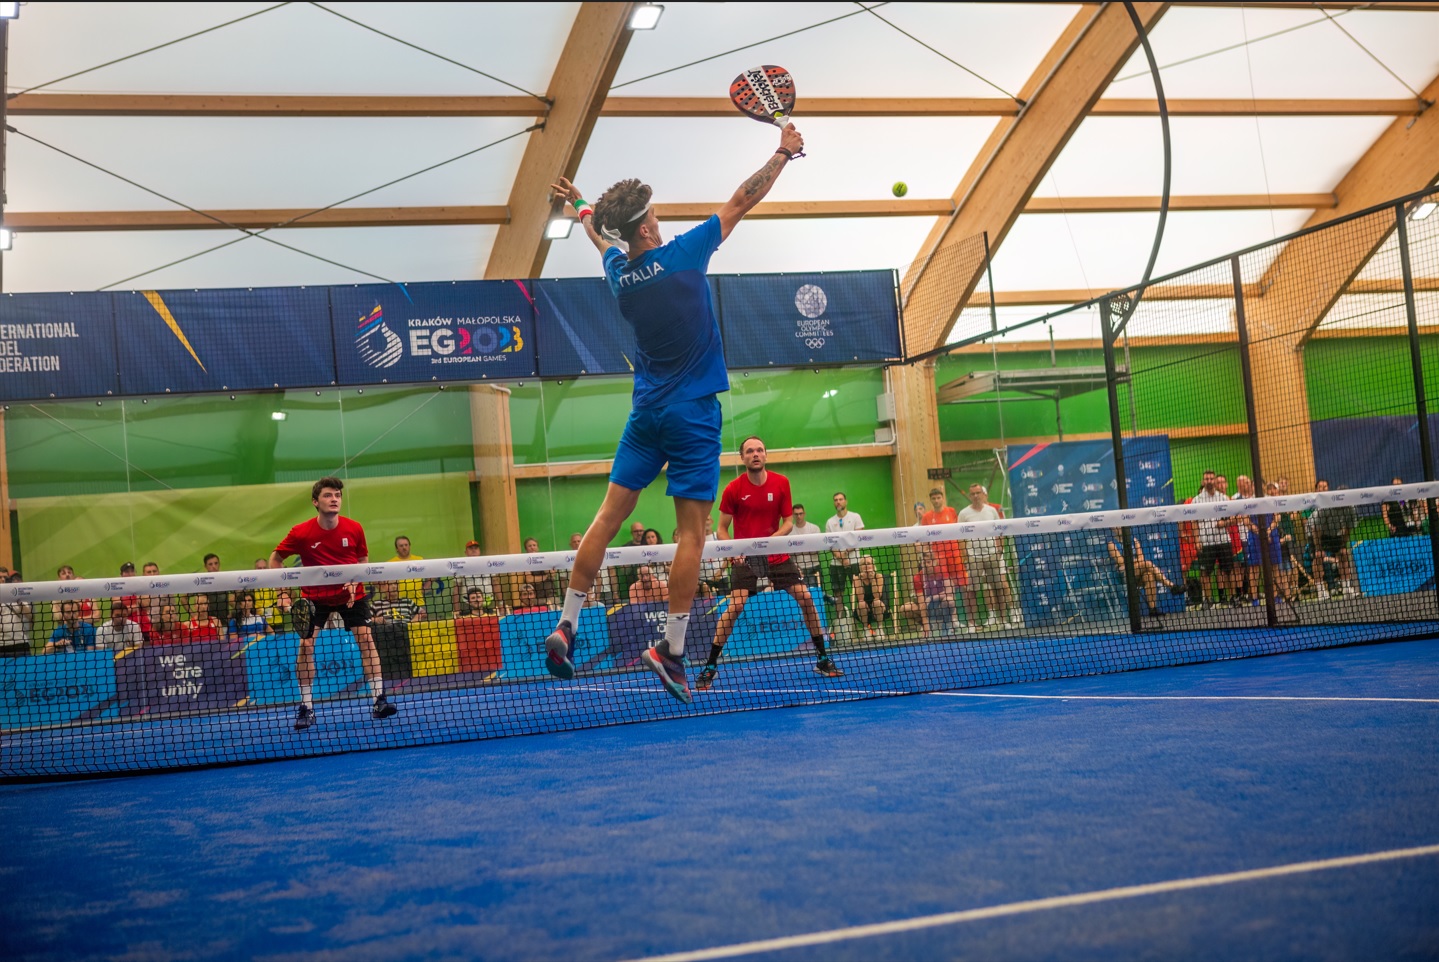 Alejandro Blanco: European Games a historic moment for the growth of padel